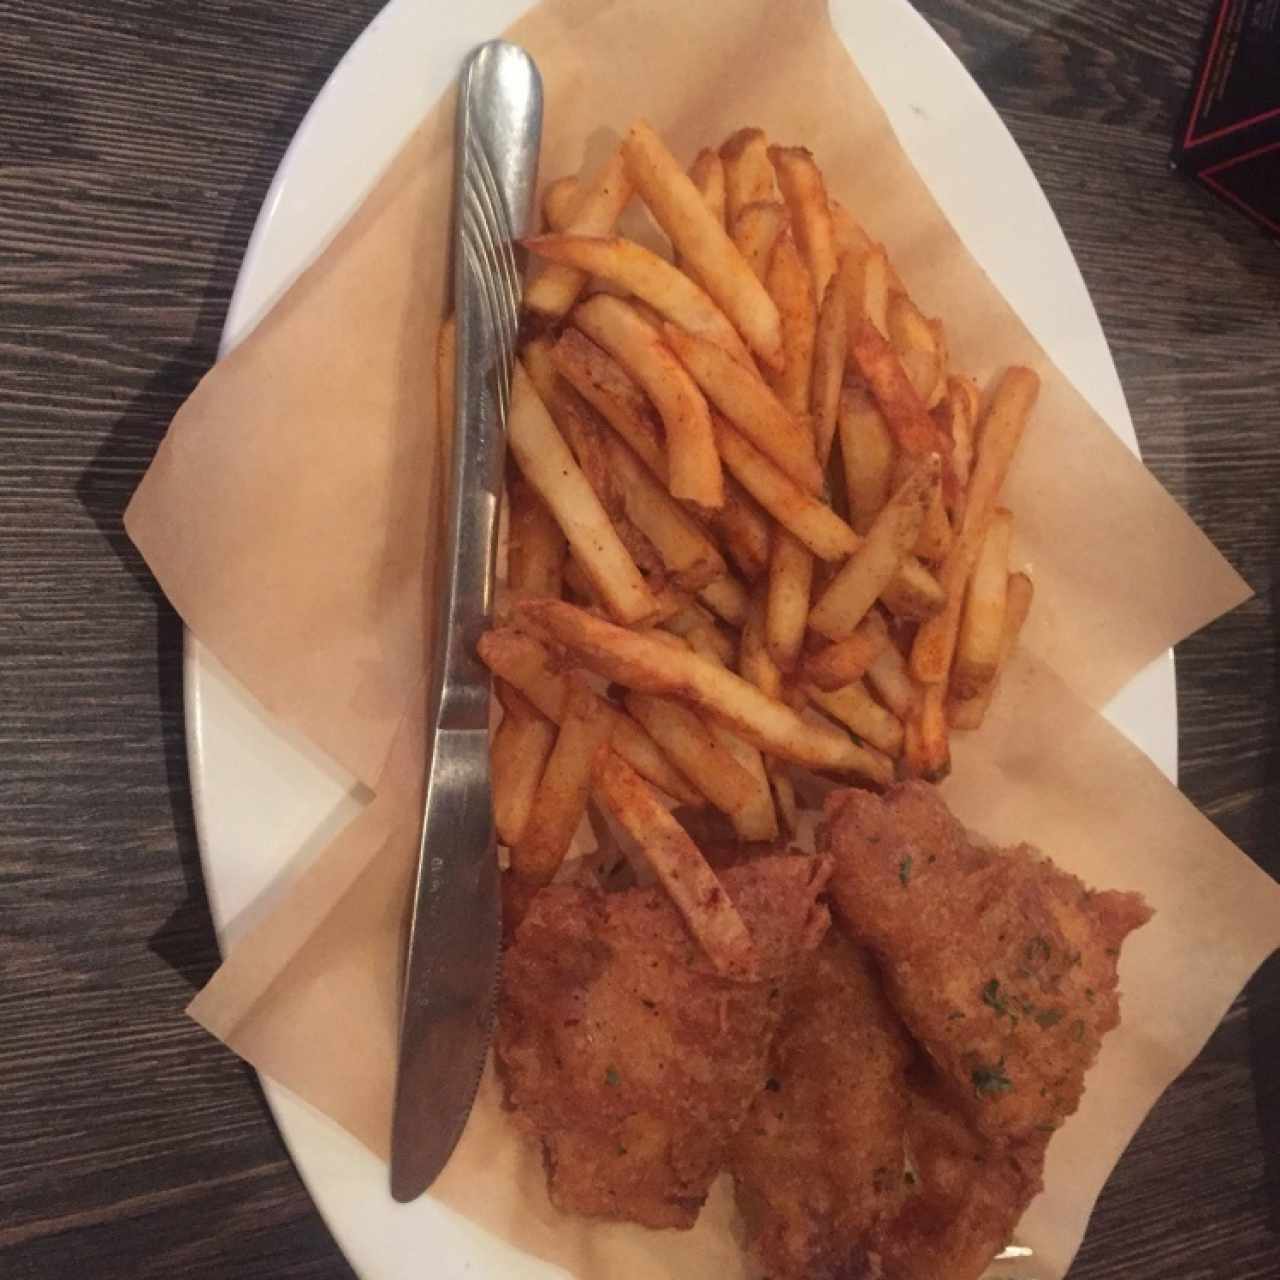 Beer Batter Fish and Chips